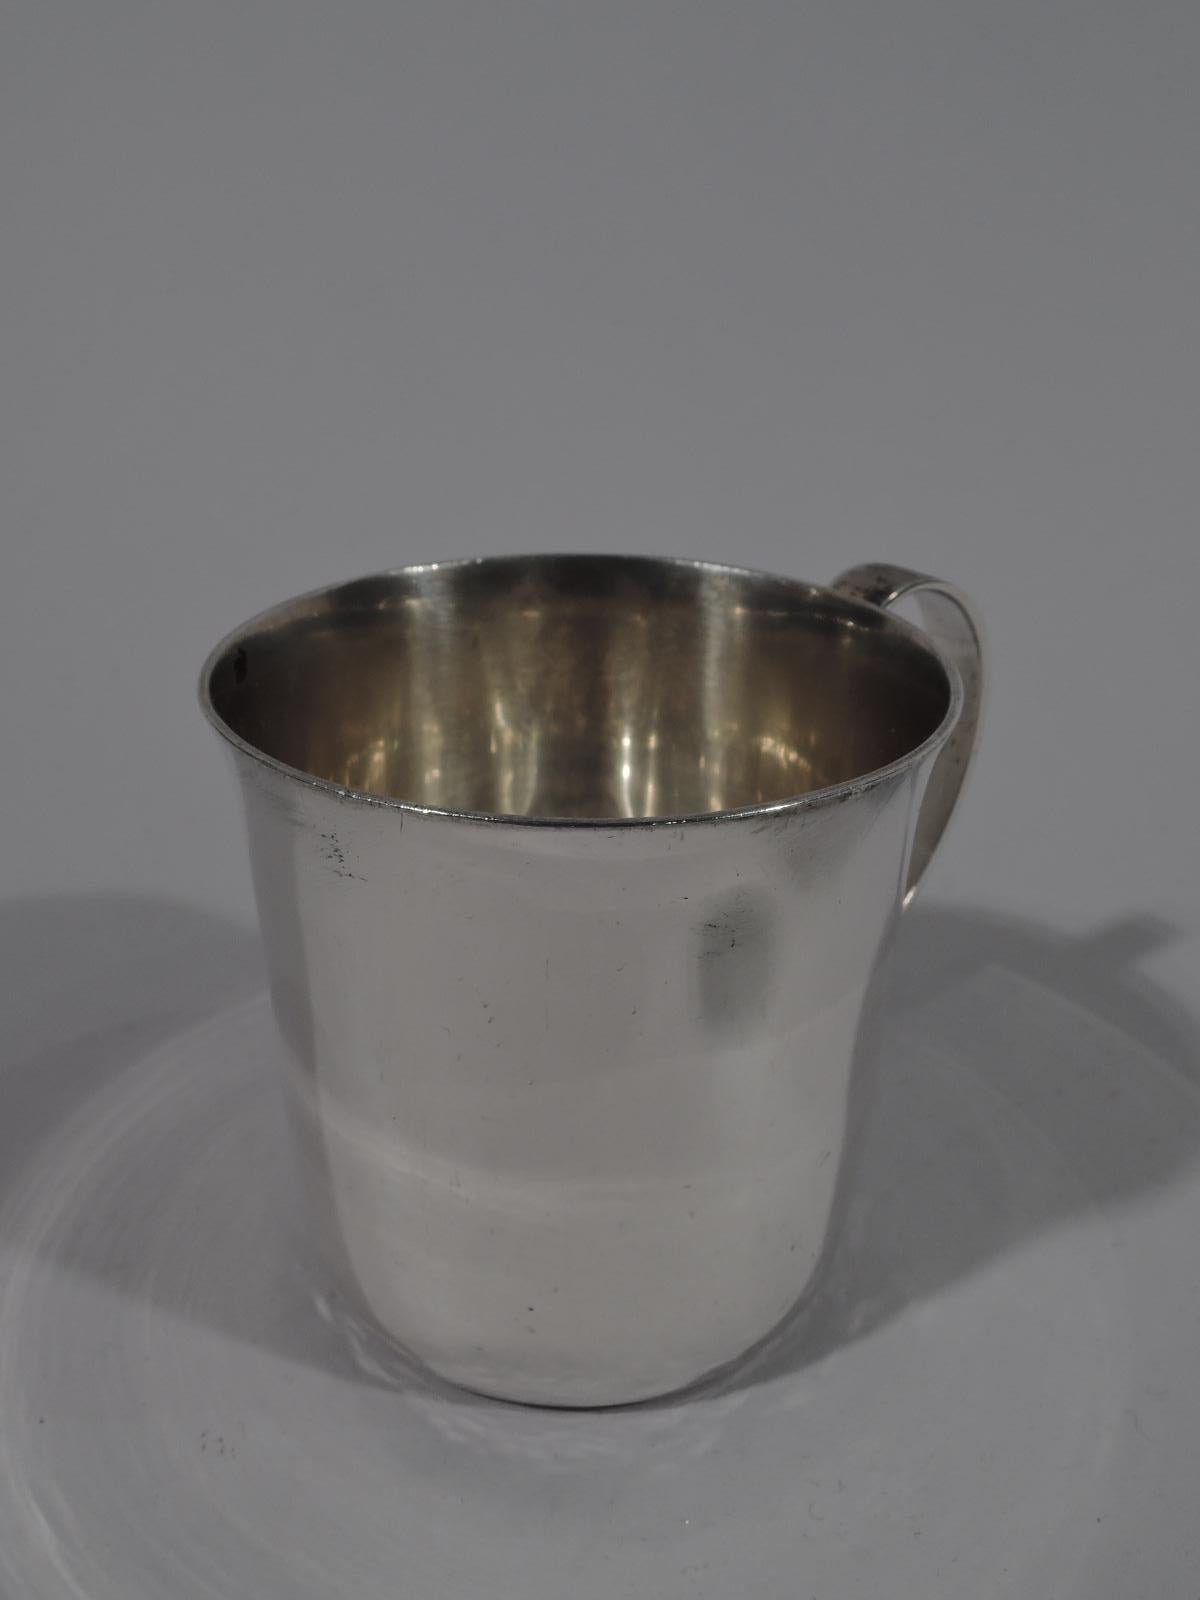 Mid-Century Modern sterling silver baby cup. Made by Tiffany & Co. in New York. Plain with flared rim and C-scroll handle. Lots of room for engraving. Fully marked including director’s letter M (1947-1956) and pattern no. 23245 (first produced in